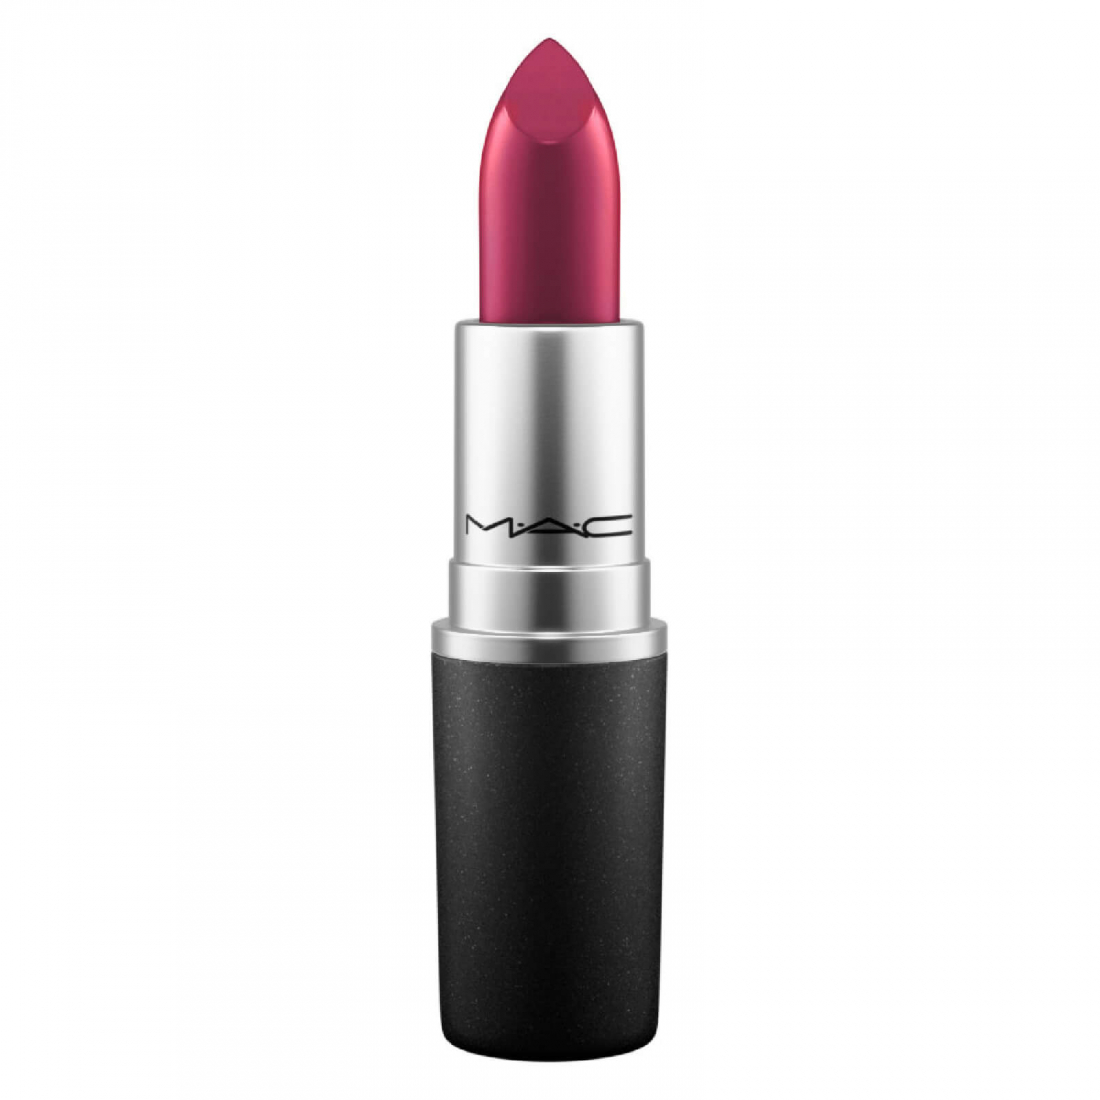 'Cremesheen' Lipstick - Party Line 3 g